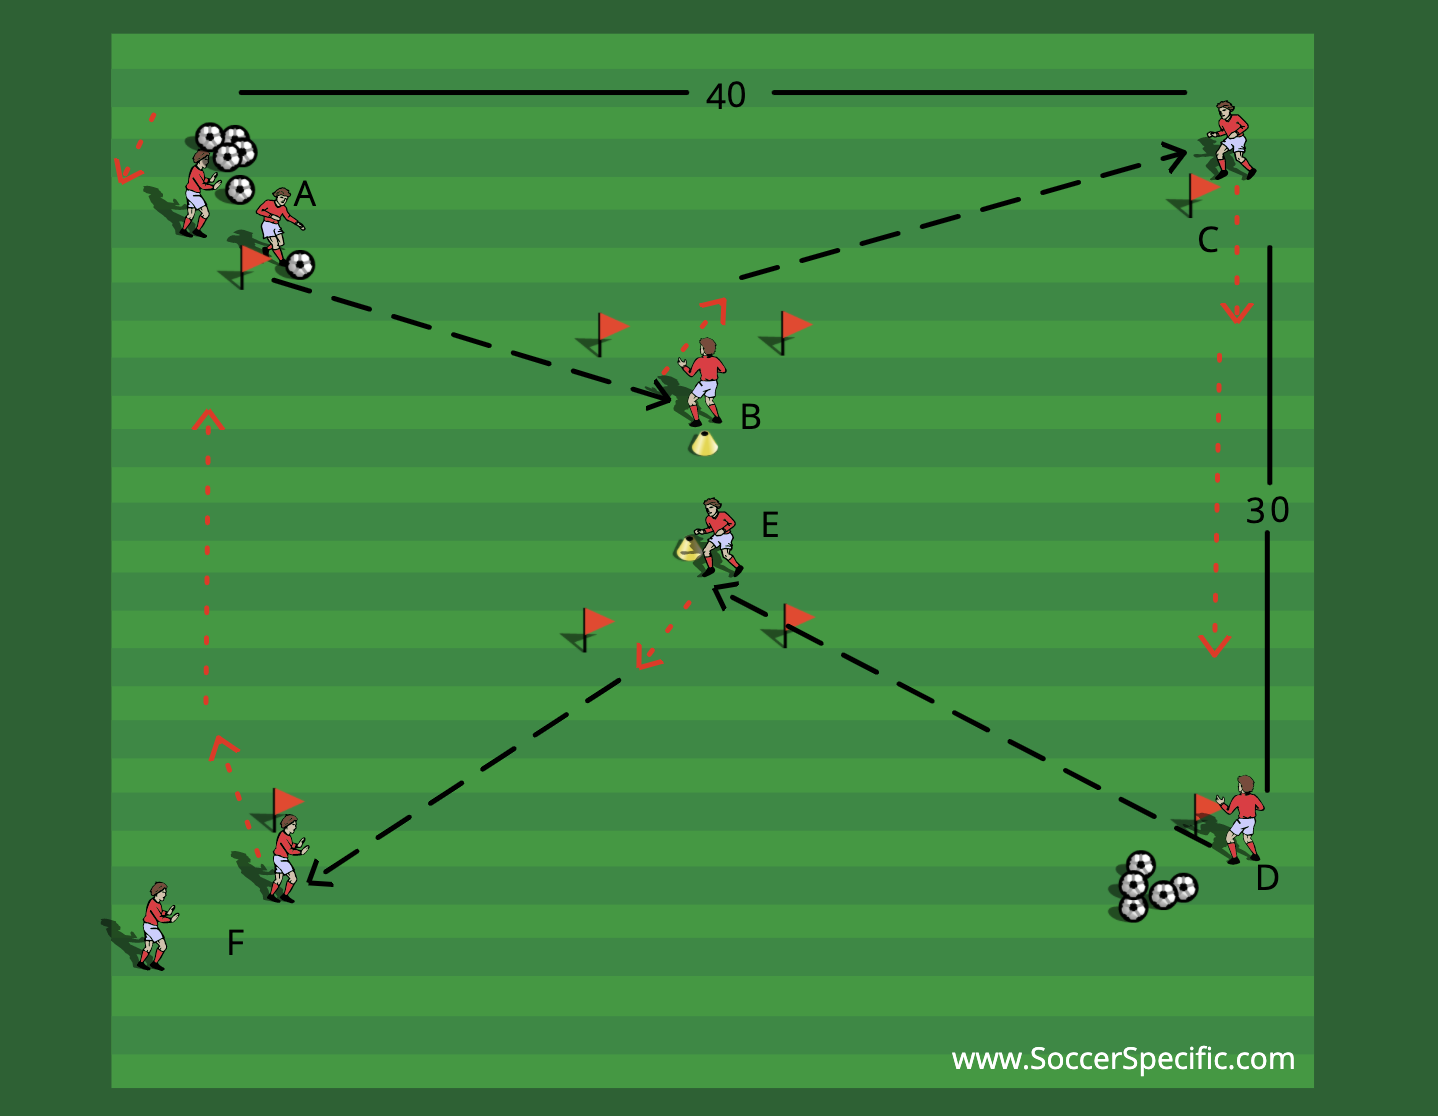 Switching Play 2 | SoccerSpecific.com